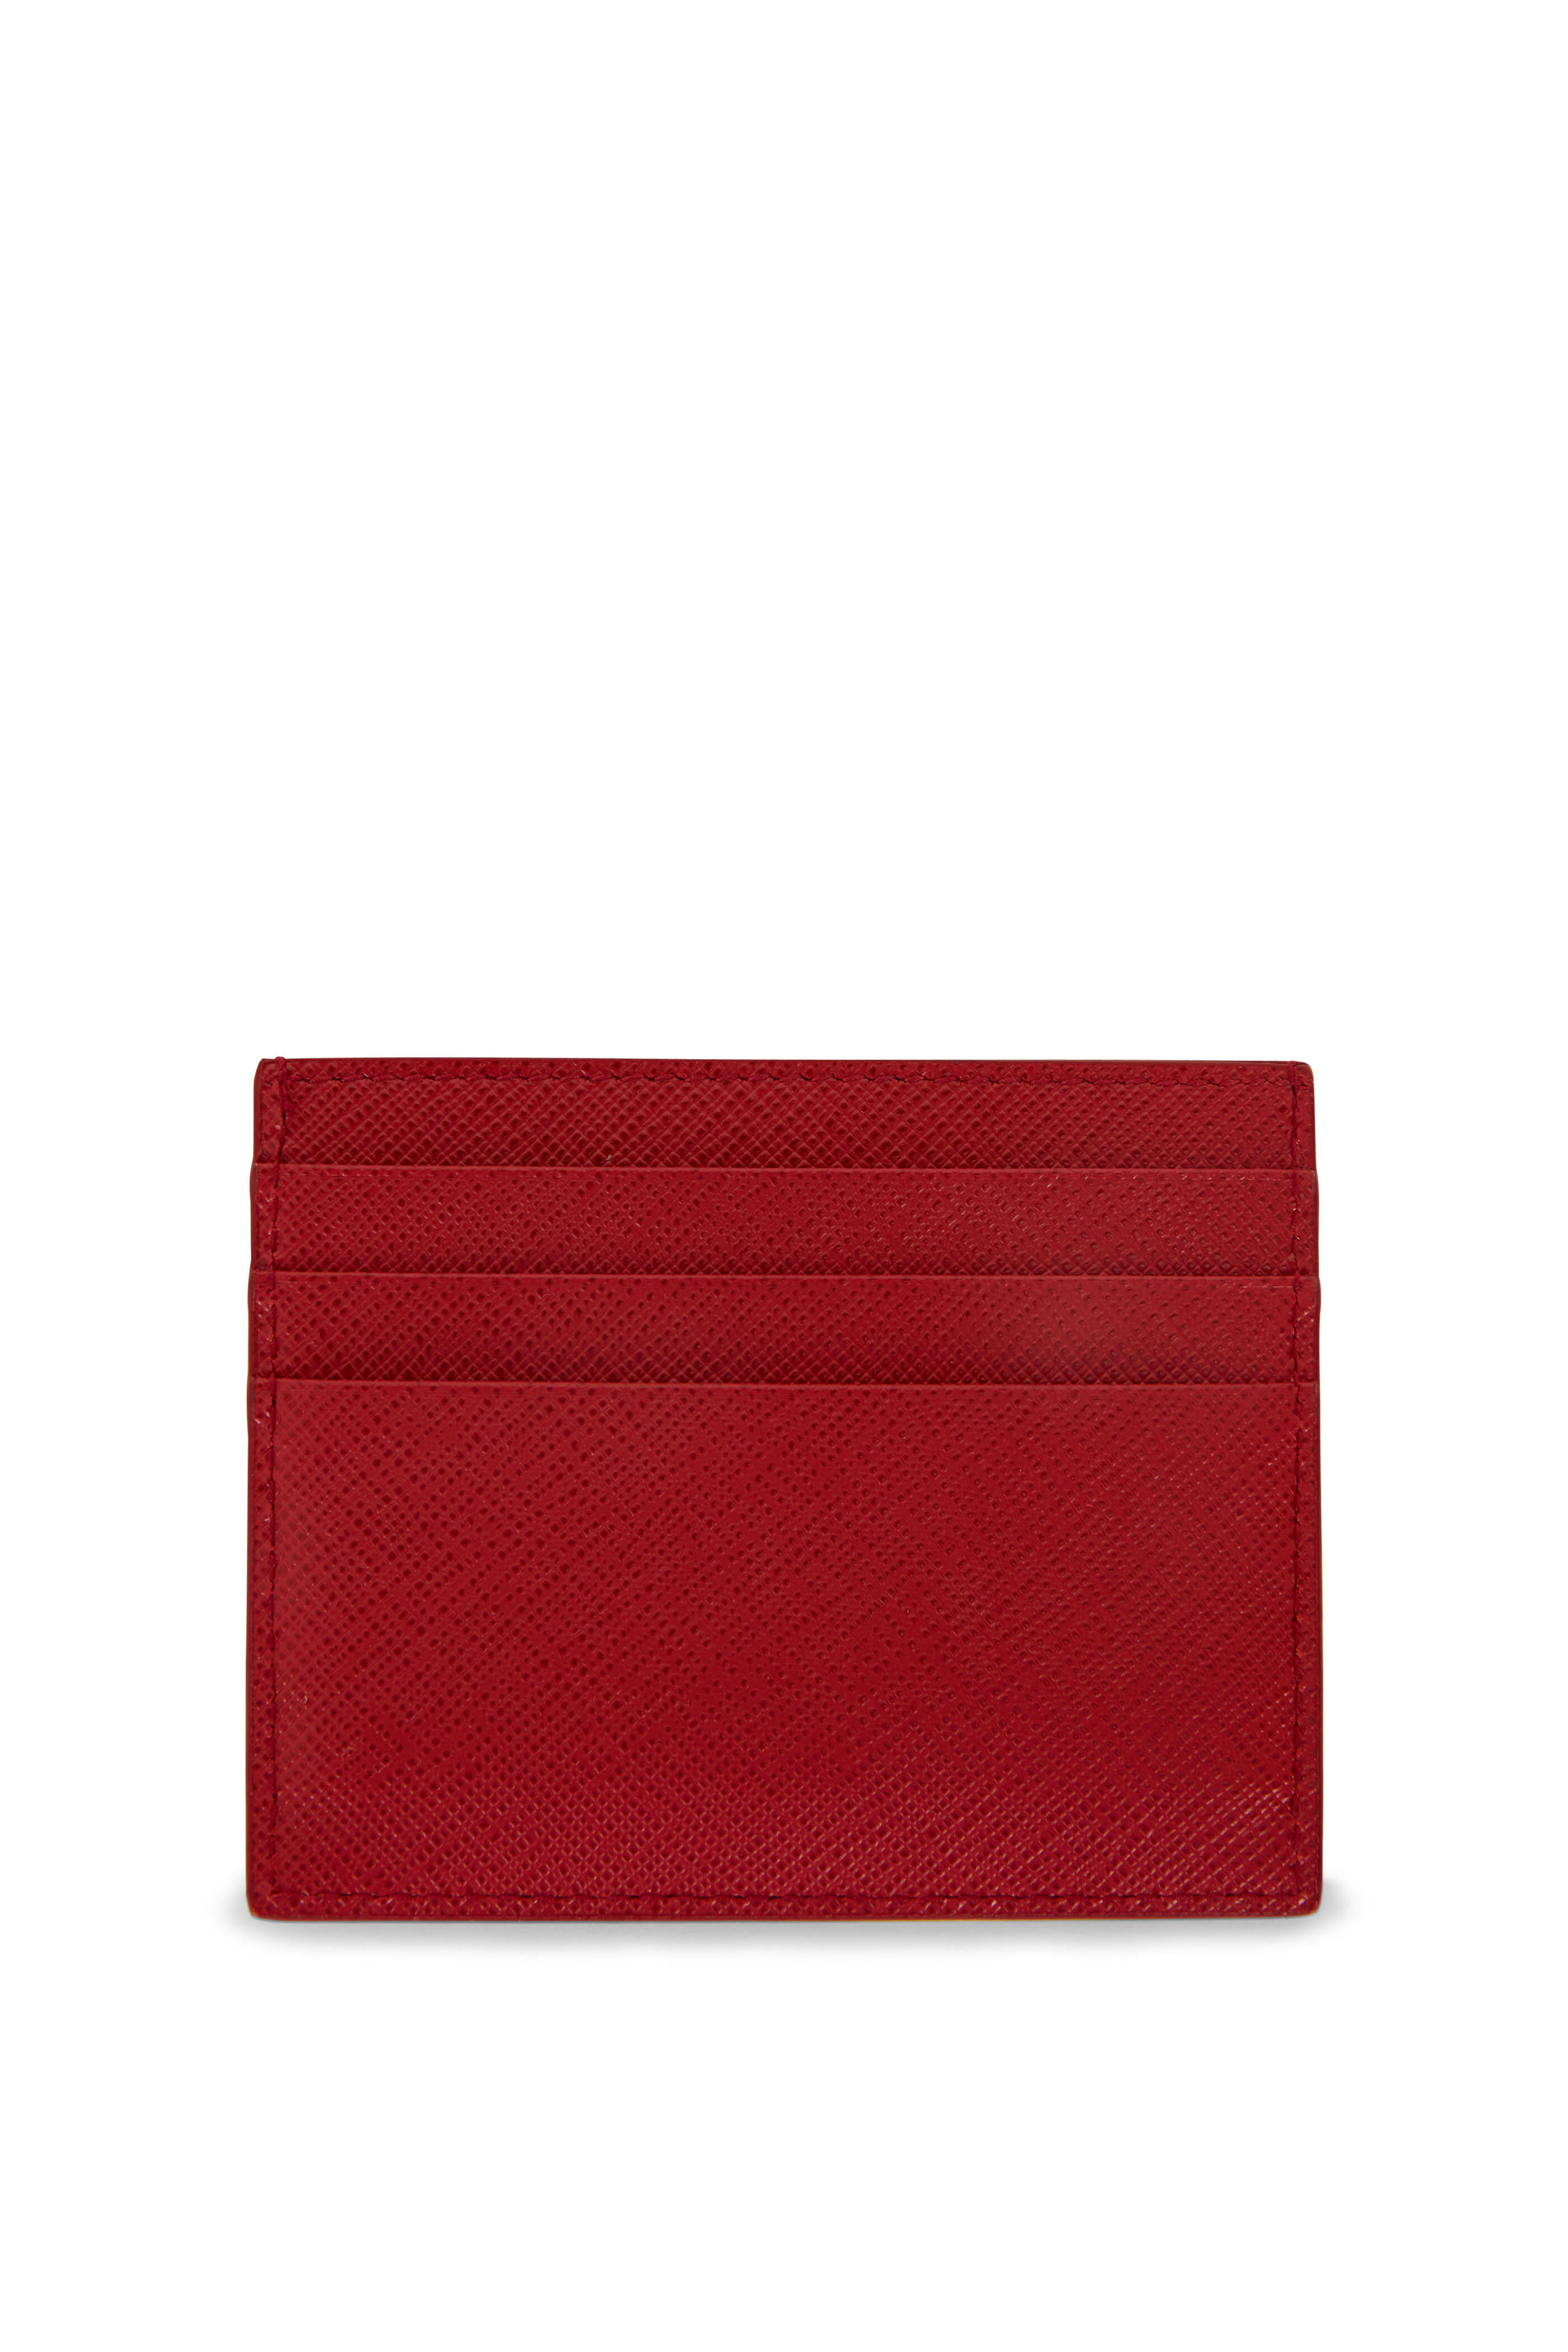 Prada - Red Saffiano Leather Card Holder | Mitchell Stores